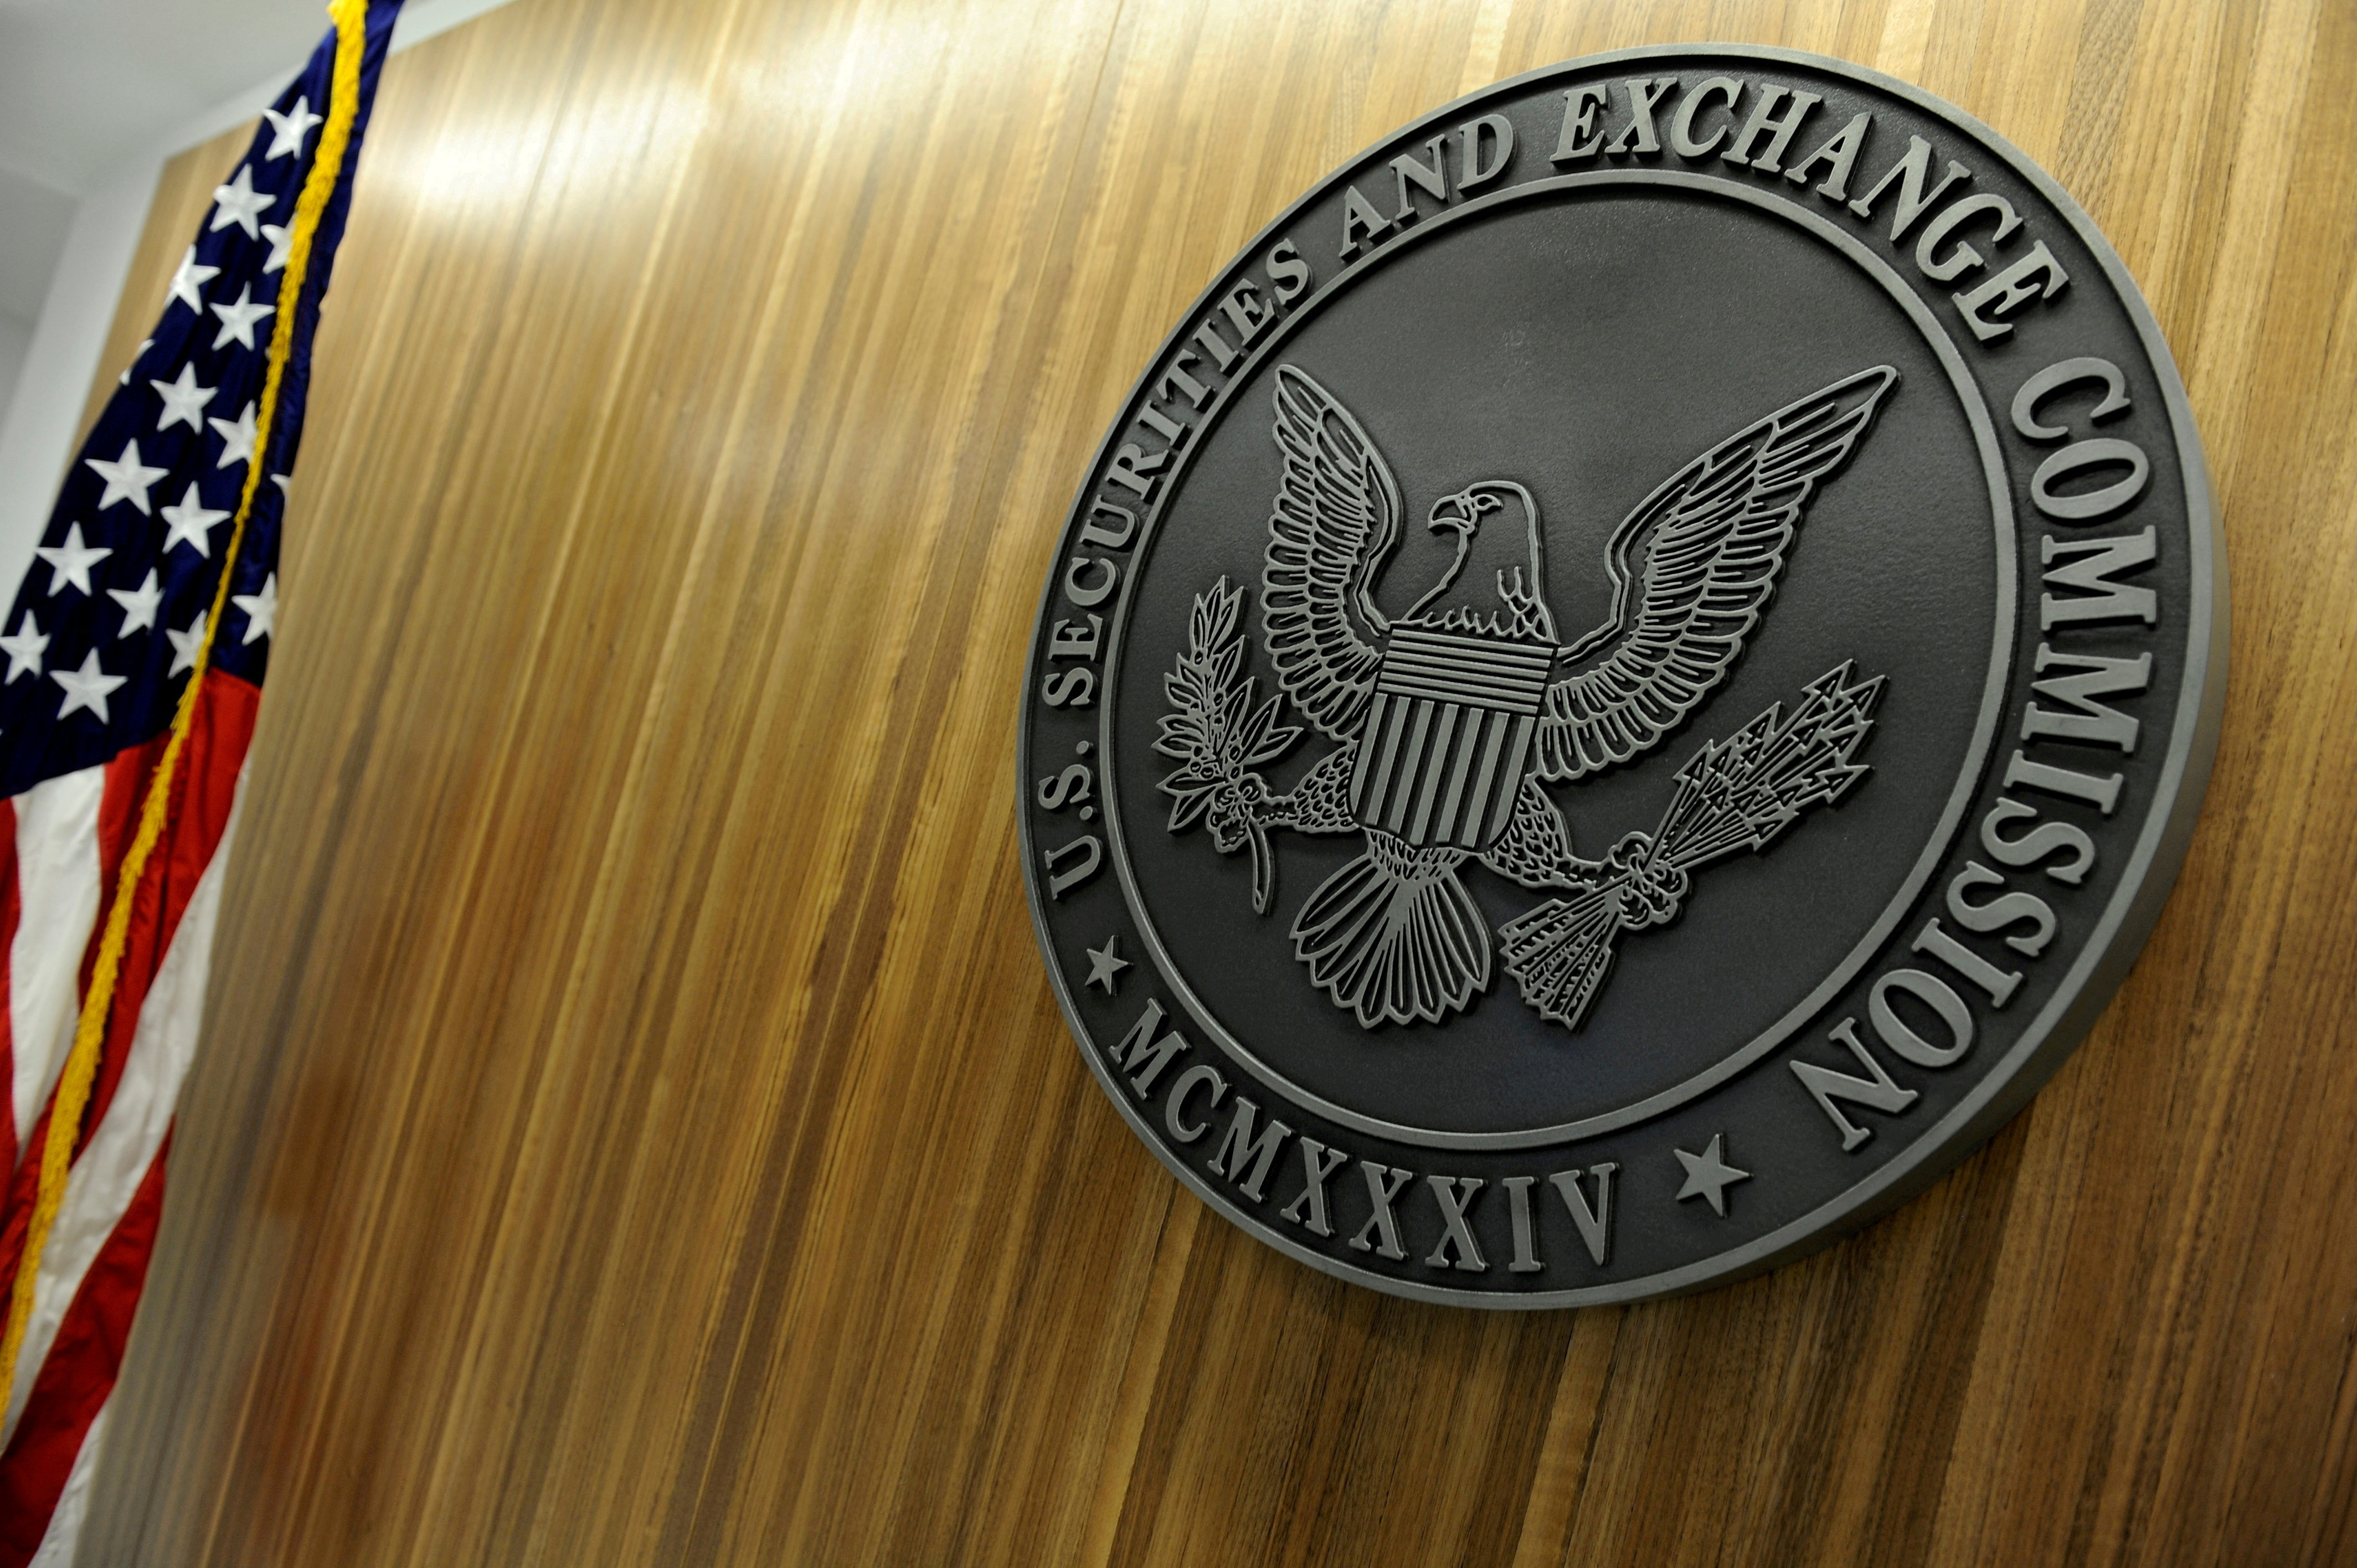 The seal of the U.S. Securities and Exchange Commission